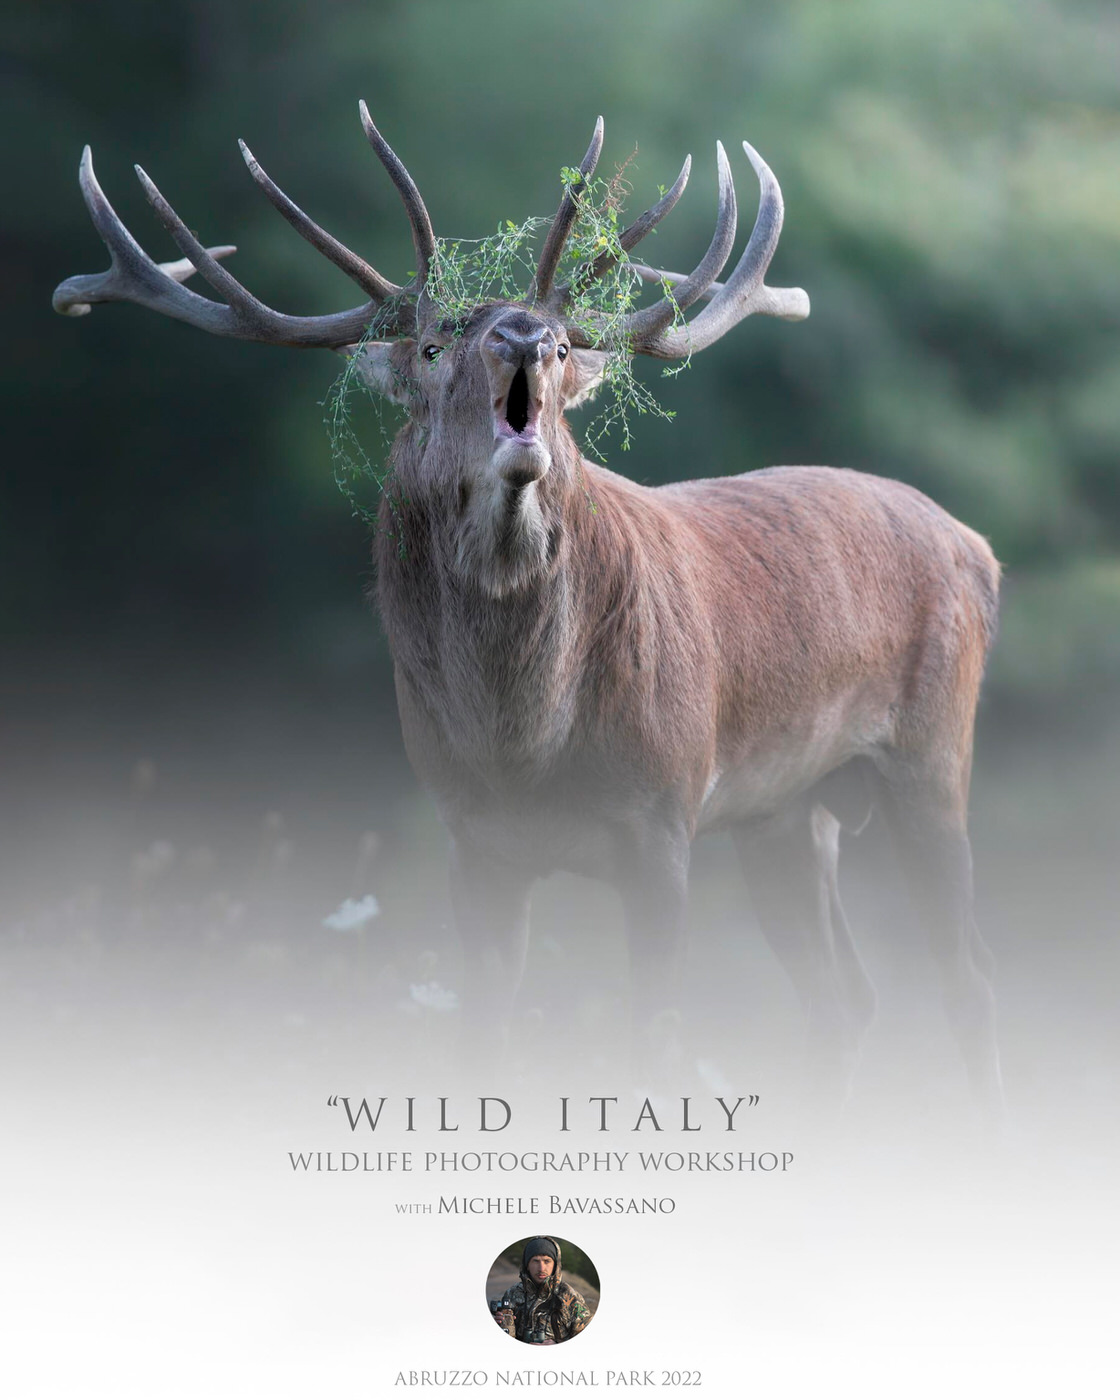 Wild Italy wildlife photography workshop in the abruzzo national park